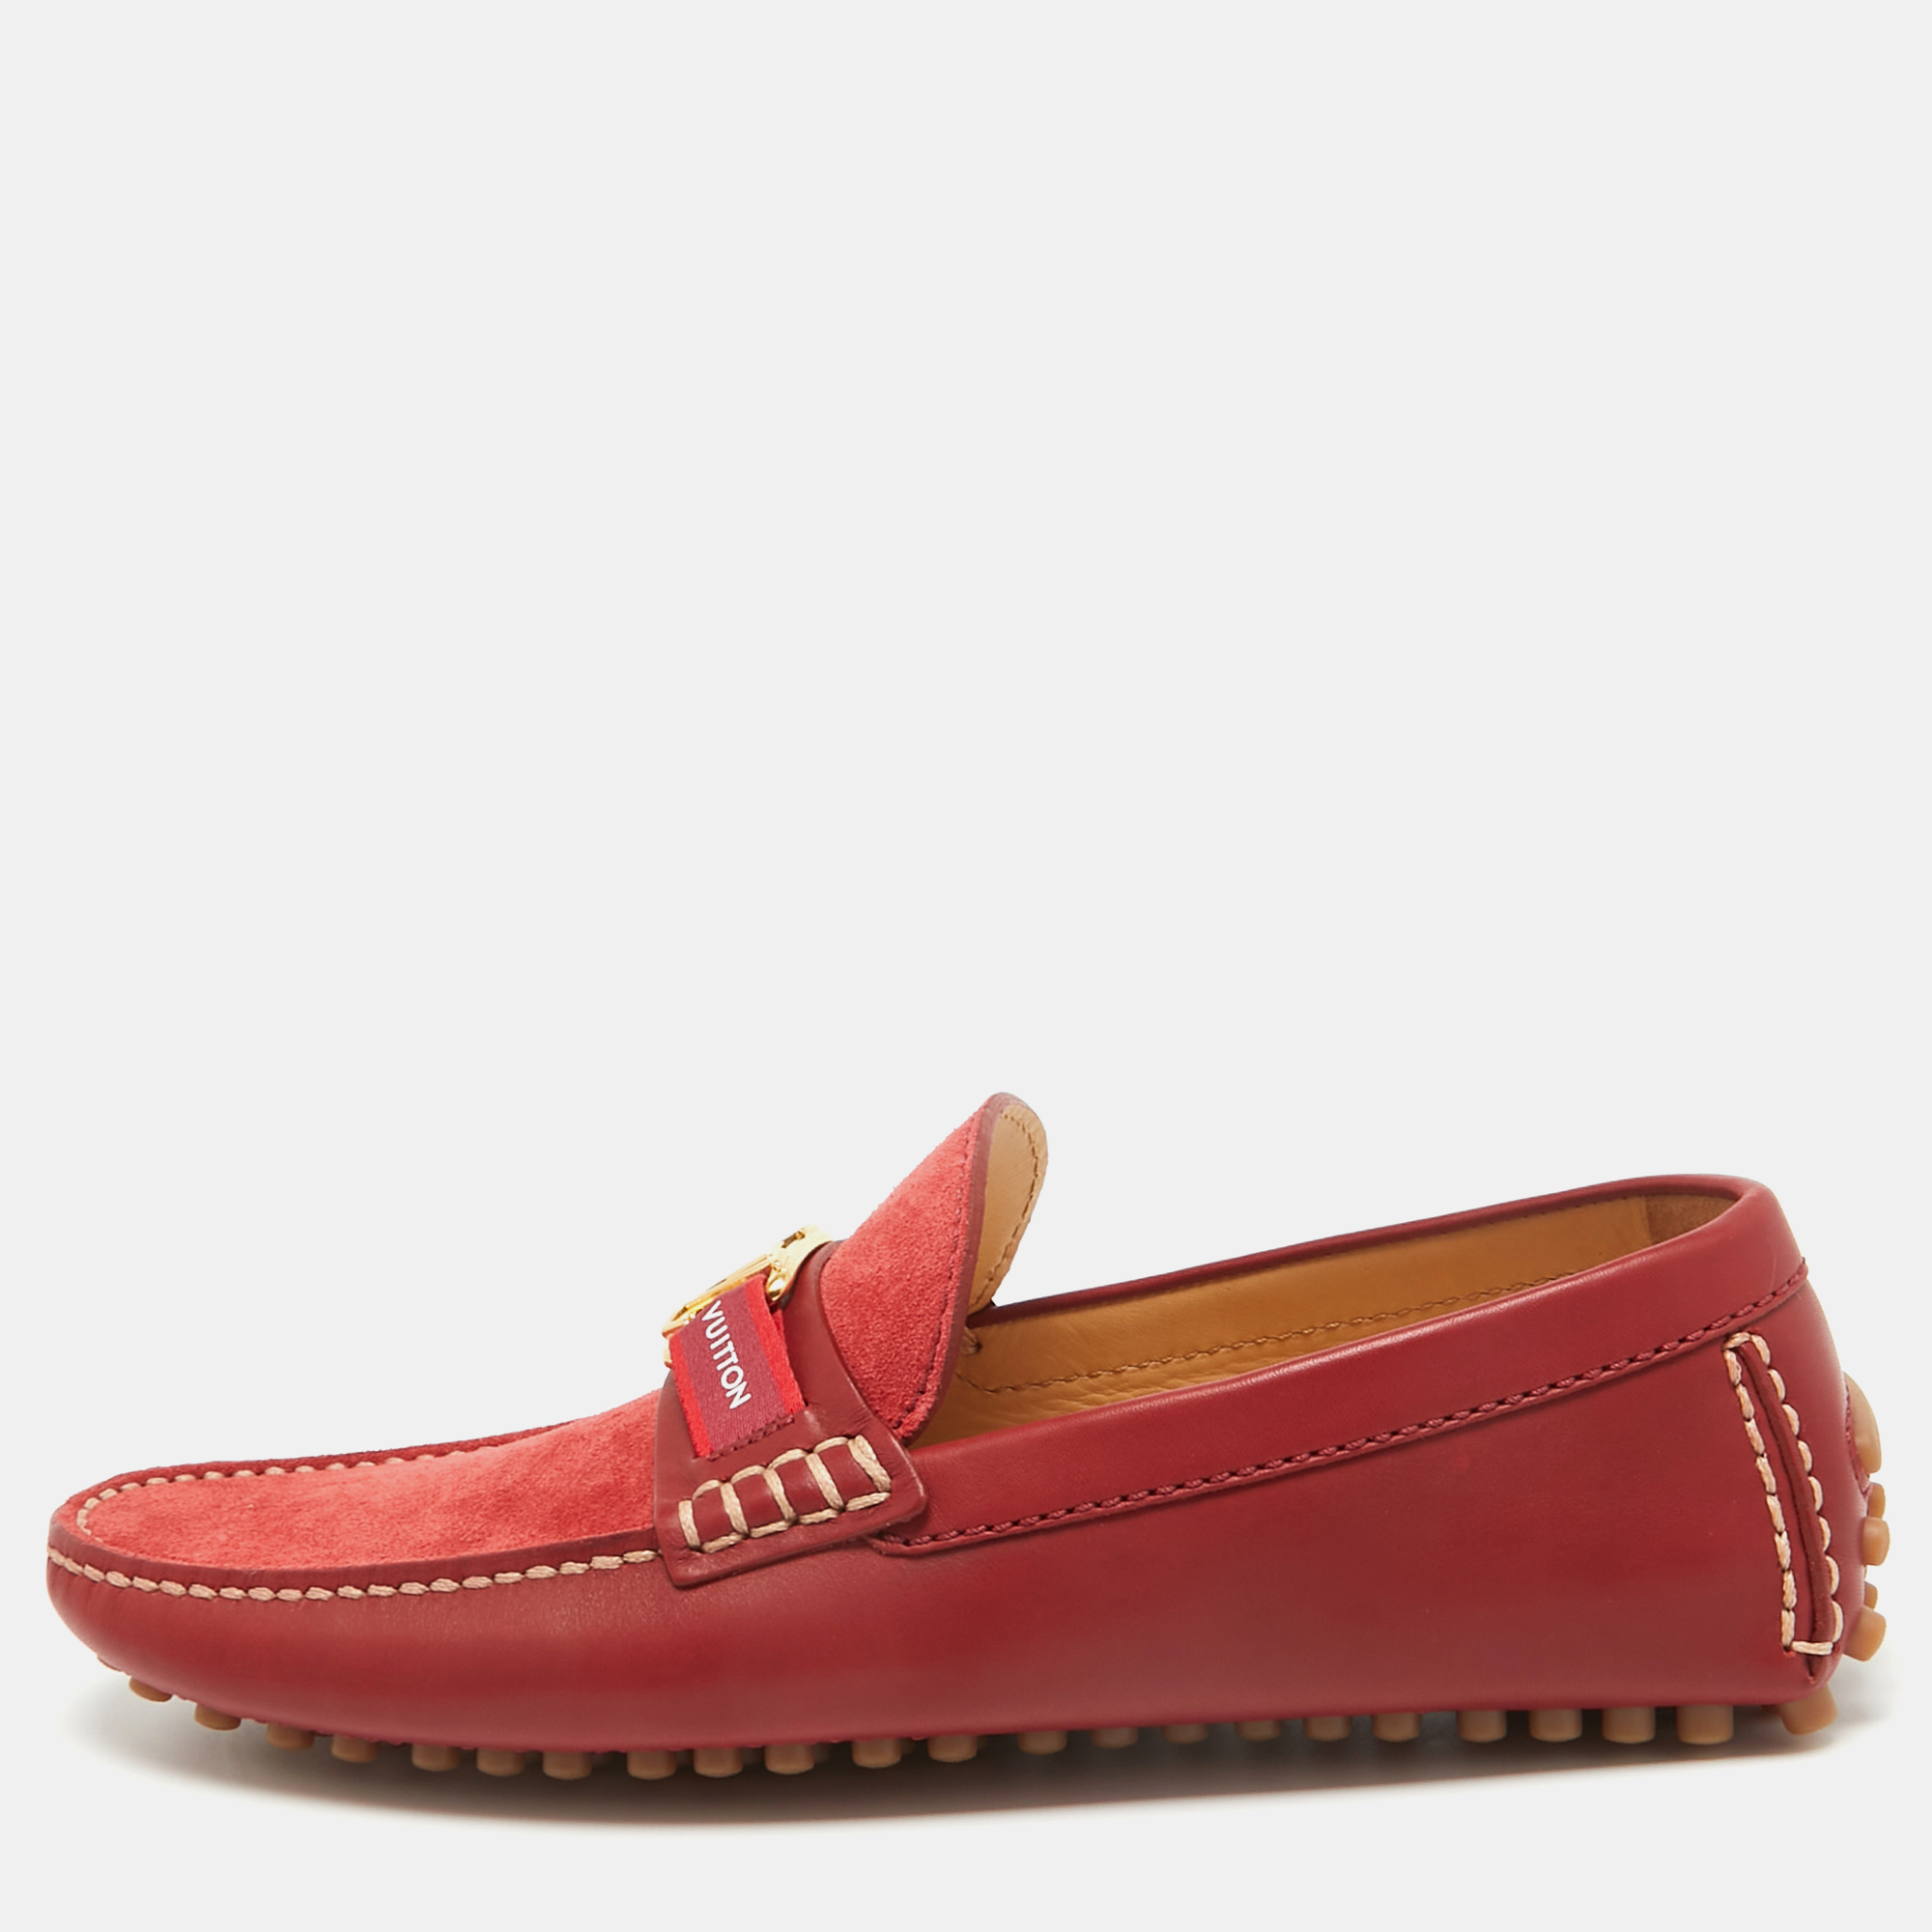 Louis vuitton red suede and leather hockenheim loafers size 40